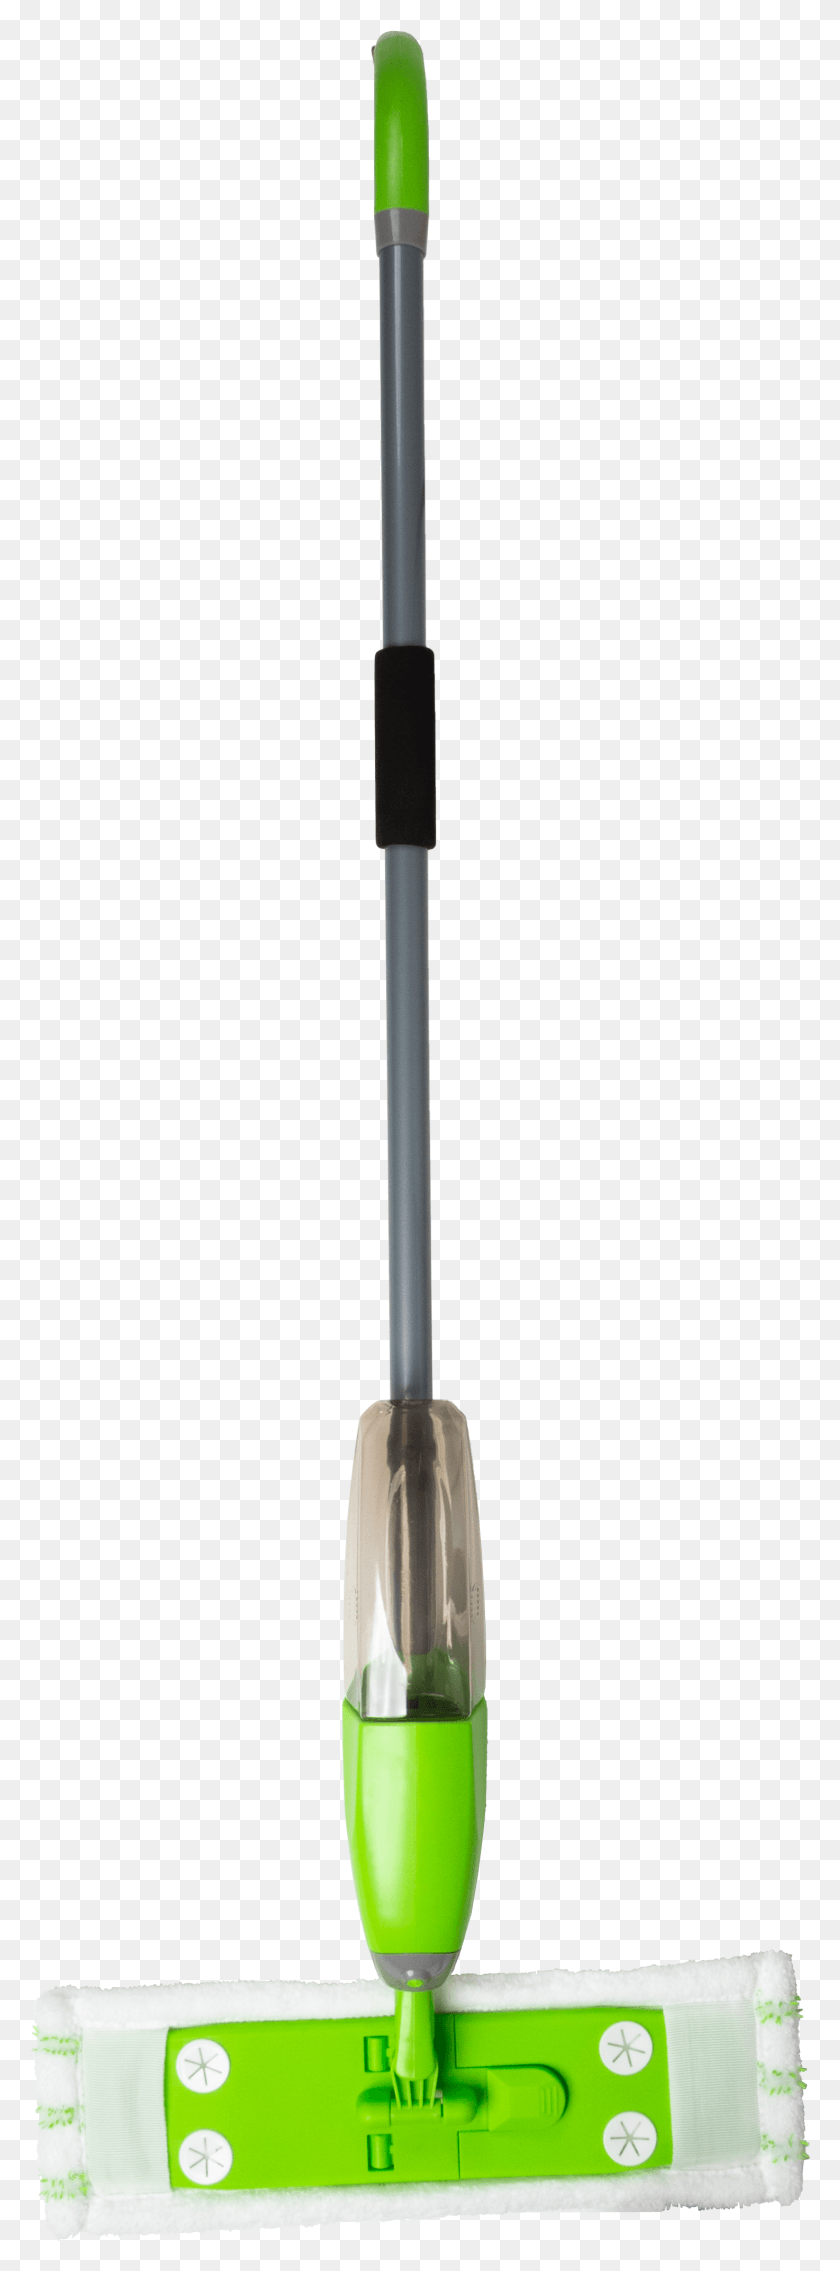 Shine Spray Mop With Comfort Grip Handle Silverlime Shovel, Oars, Paddle, Arrow HD PNG Download